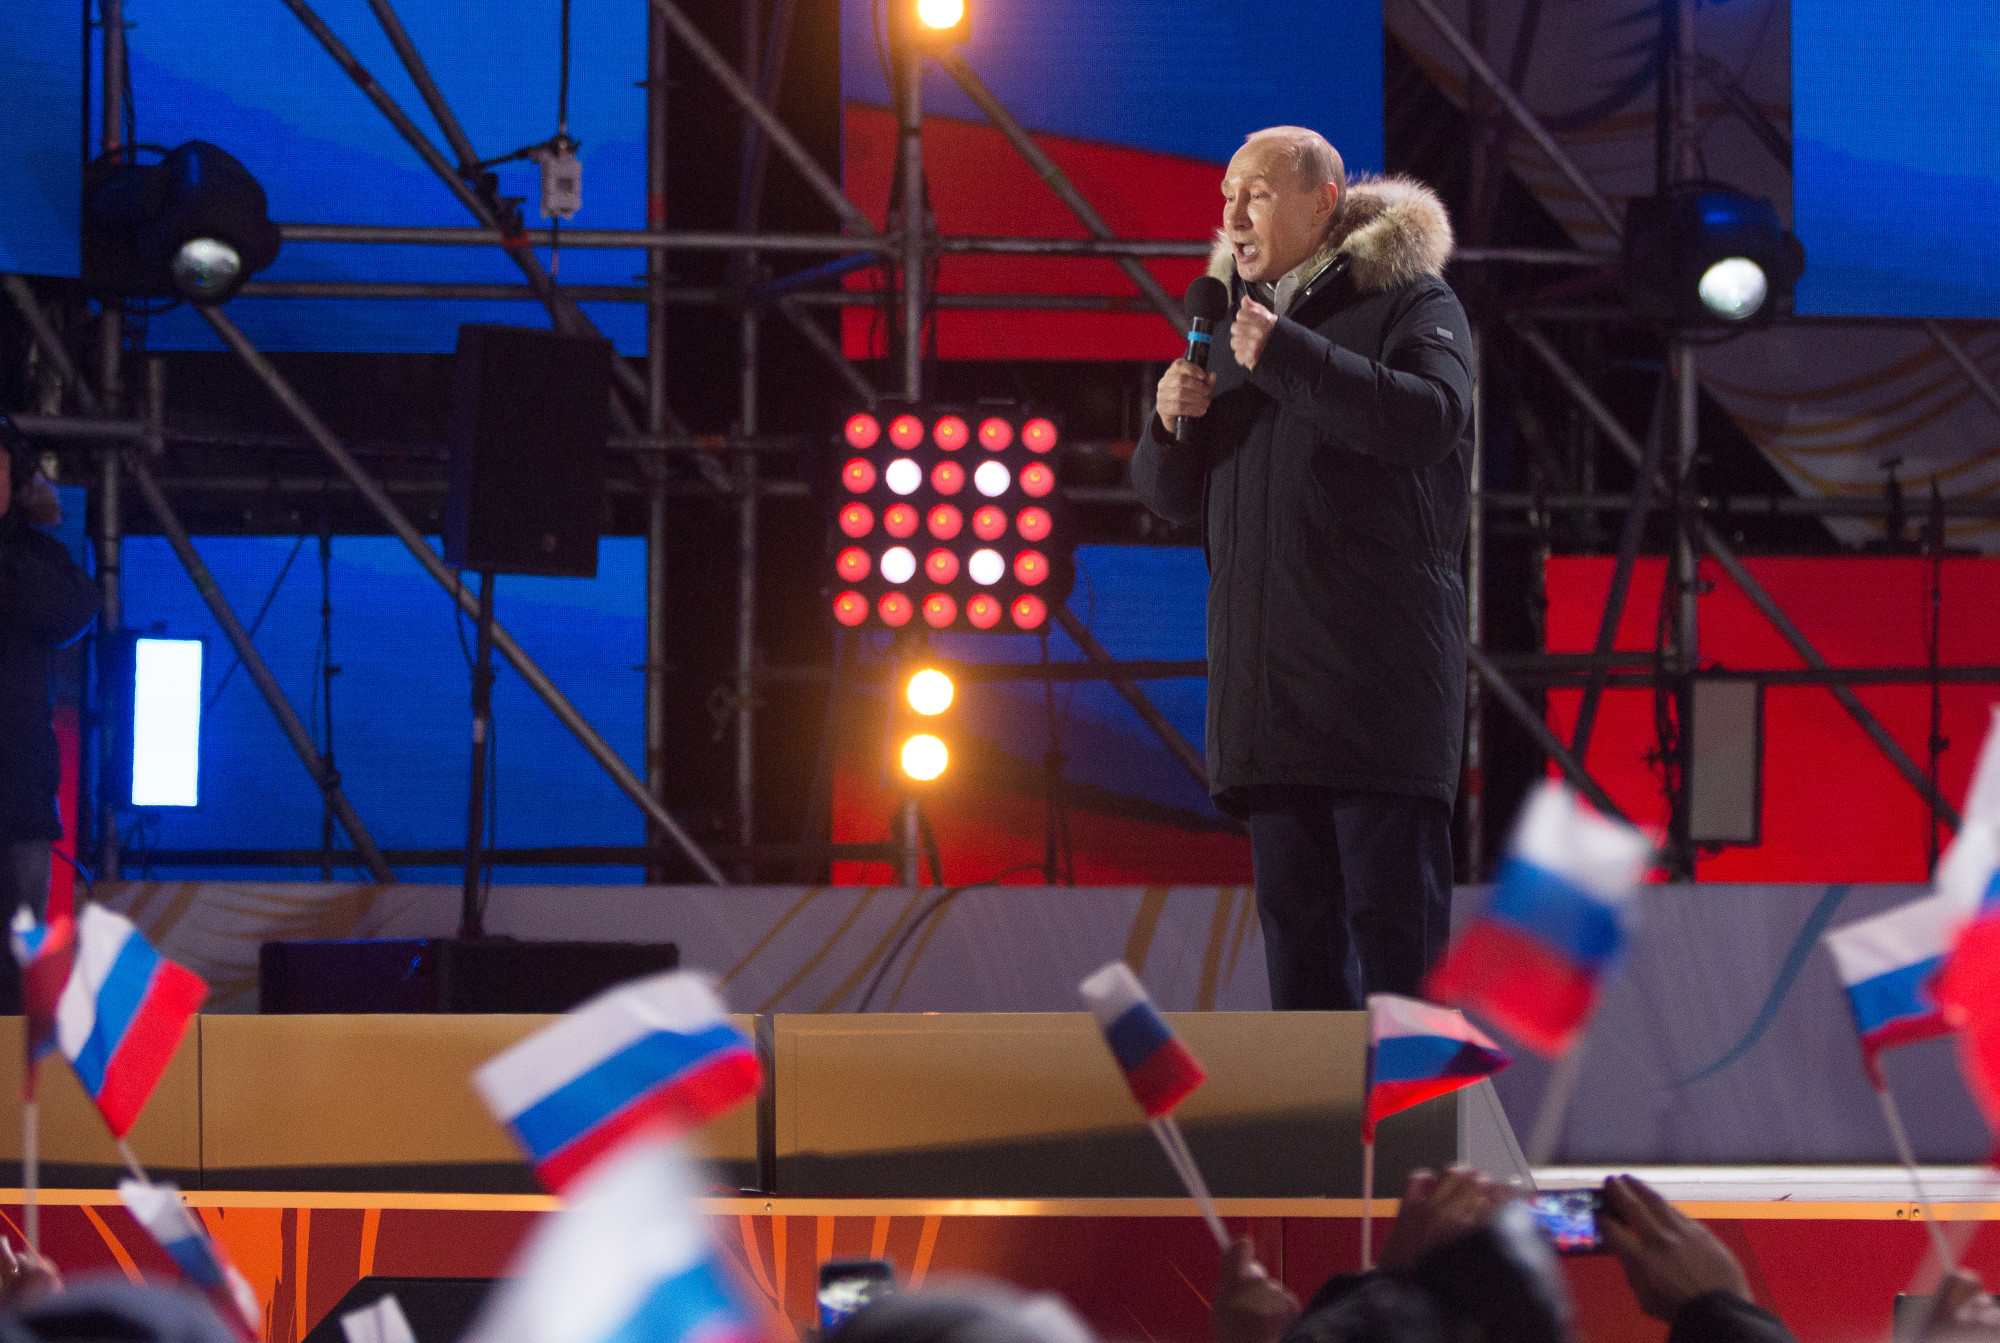 Vladimir Putin speaks during a rally near the Kremlin in Moscow on&nbsp;March 18.